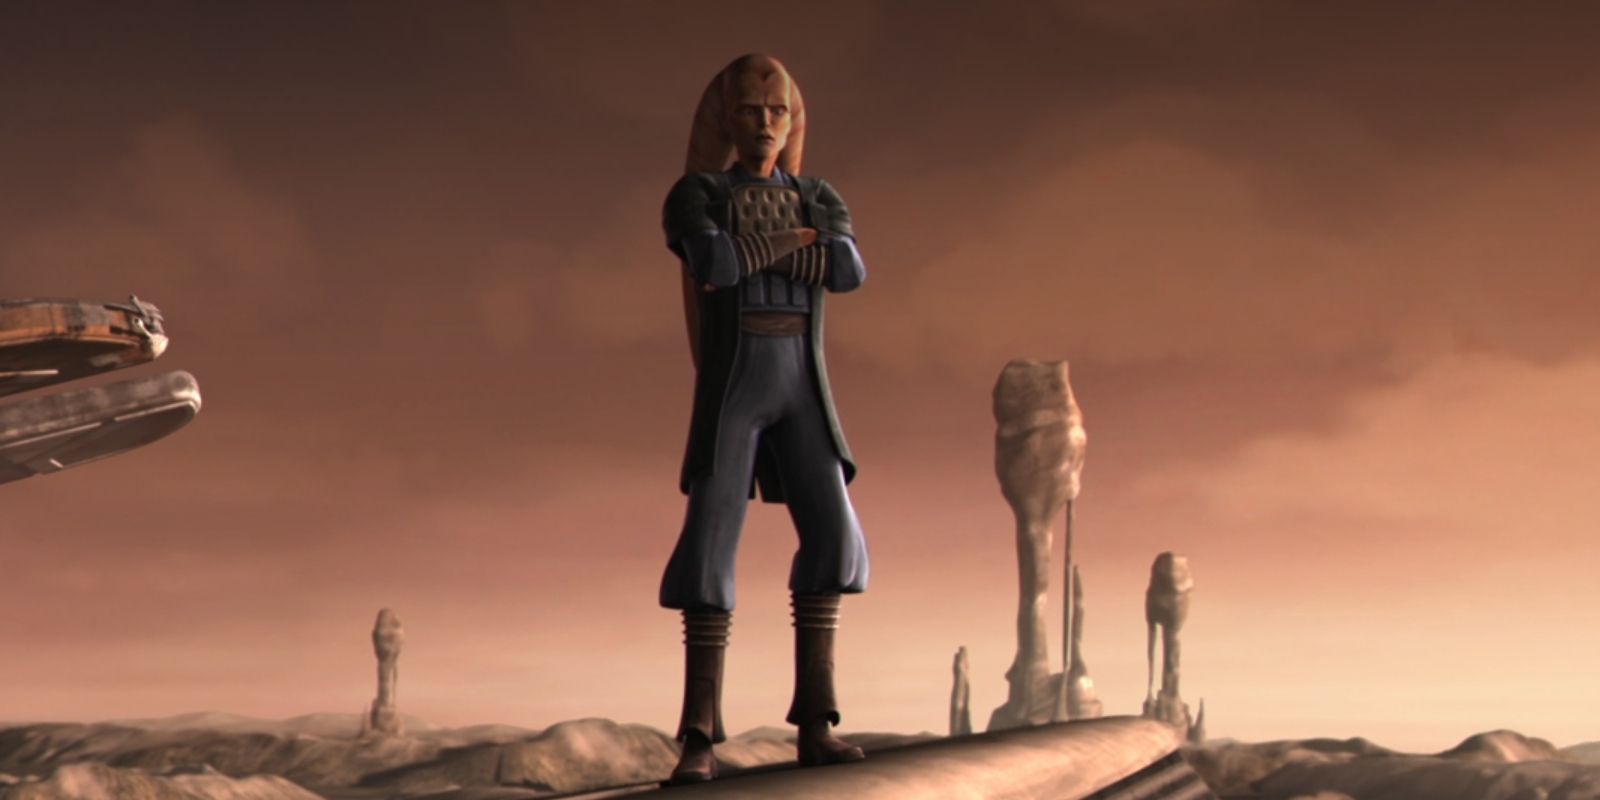 Star Wars The Essential Clone Wars Episodes For Fans of The Bad Batch